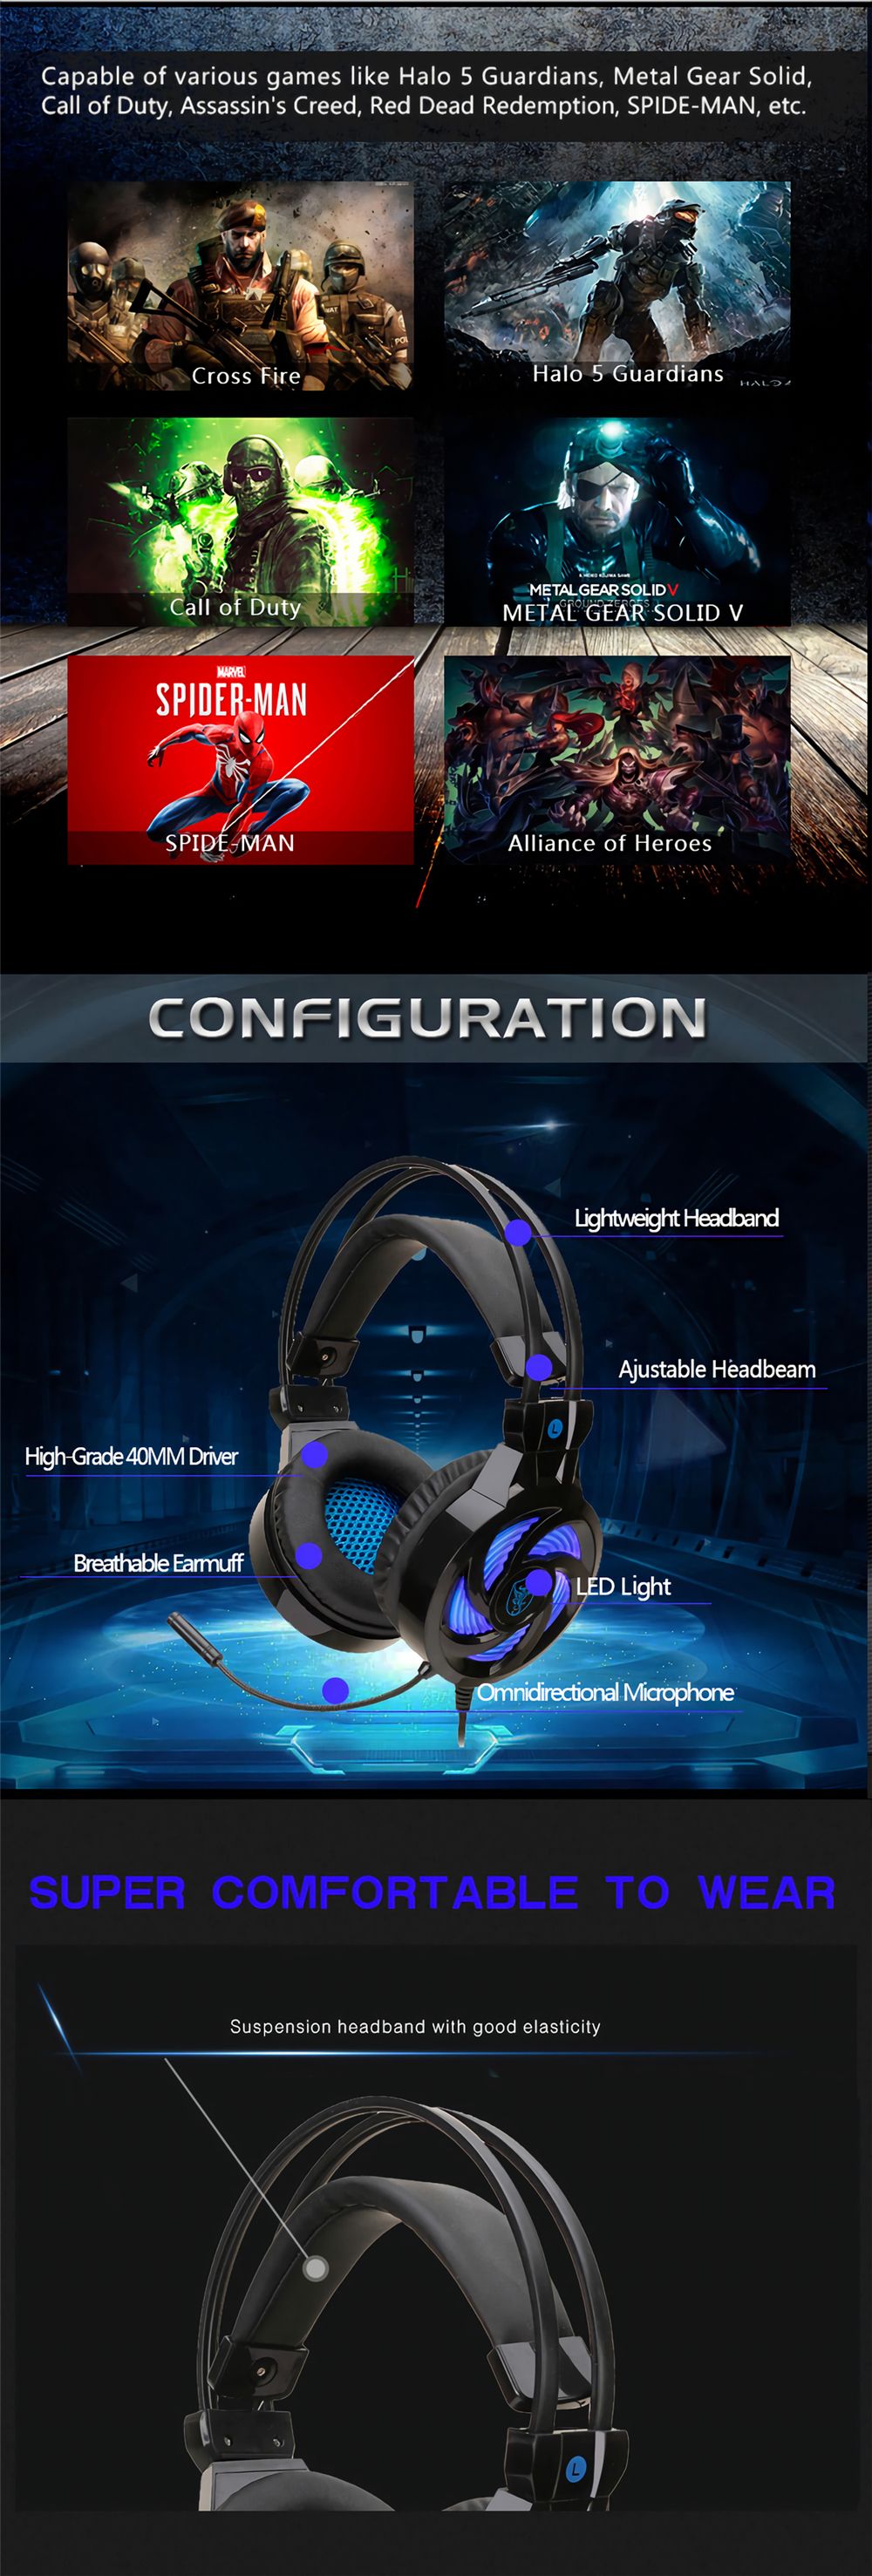 Soyto-SY855MV-Game-Headphone-35mm-USB-Wired-Bass-Gaming-Headset-Stereo-Surround-Sound-Headphones-wit-1696270